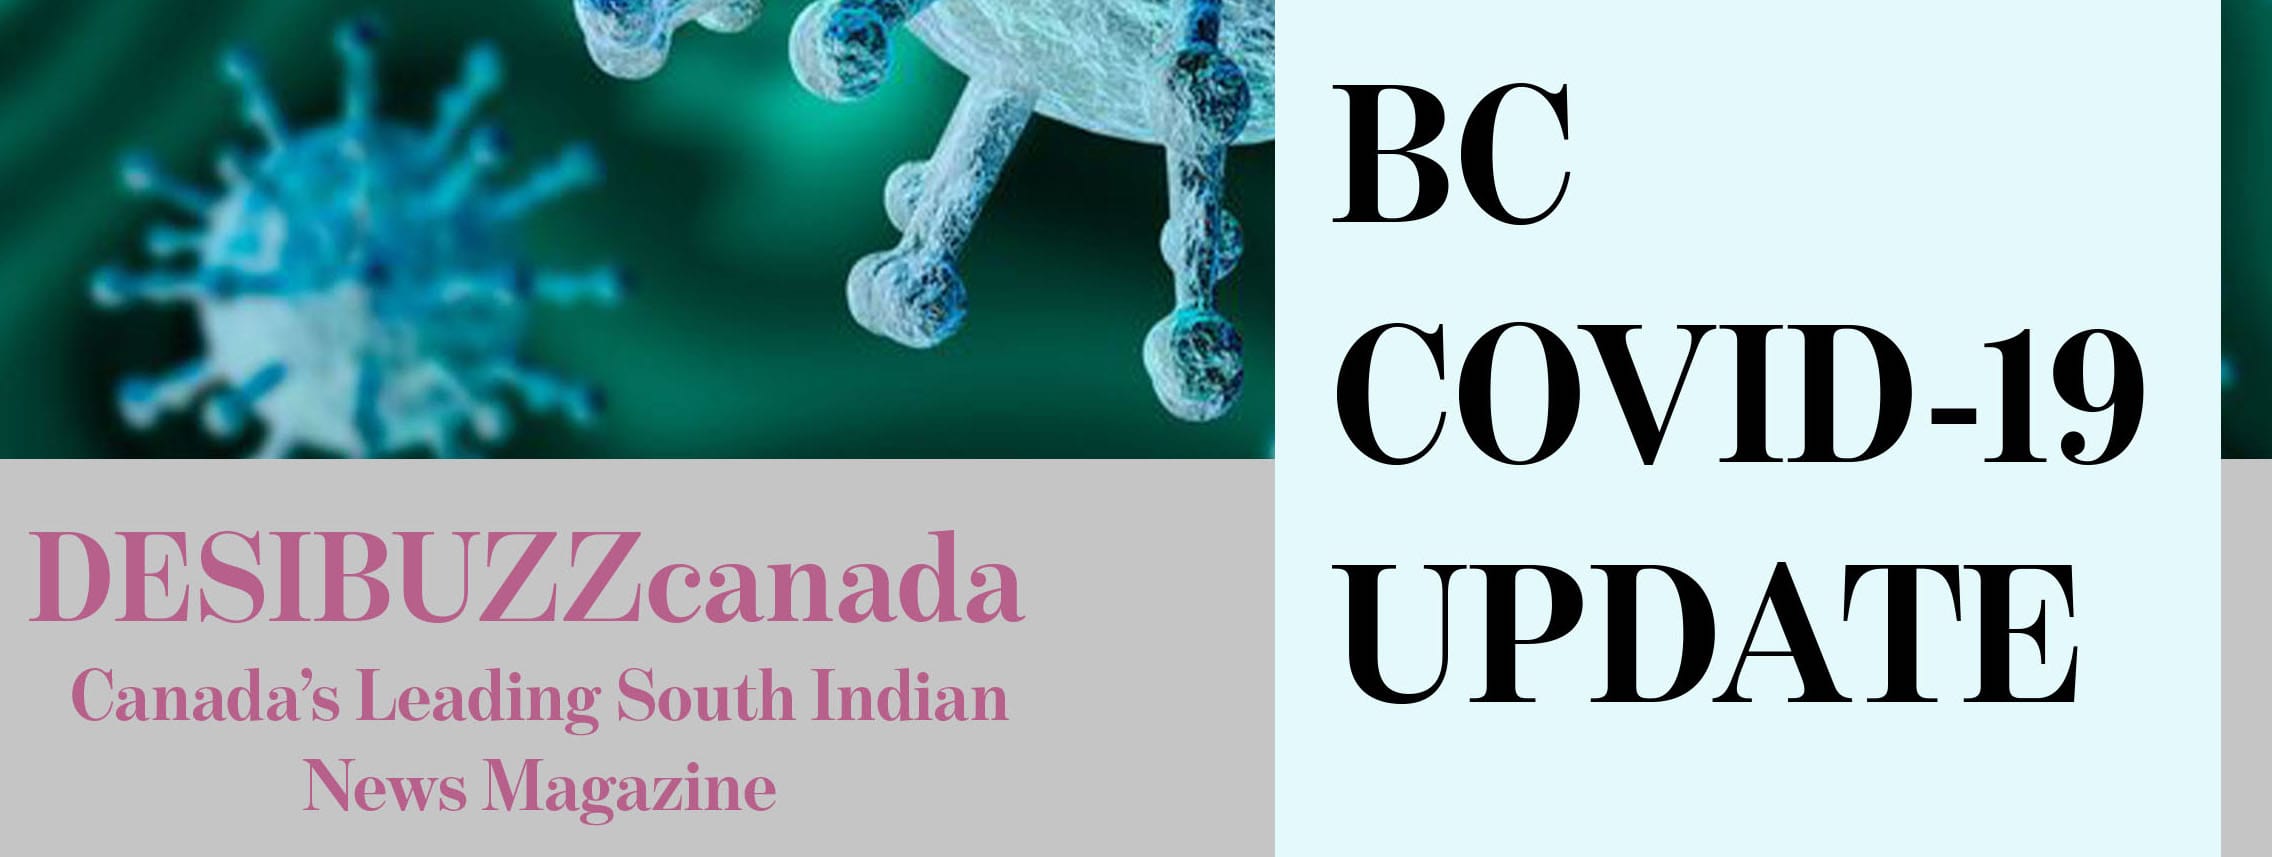 BC COVID-19 DAILY UPDATE: Cases Rise For Second Straight Day, Hitting Above 1200